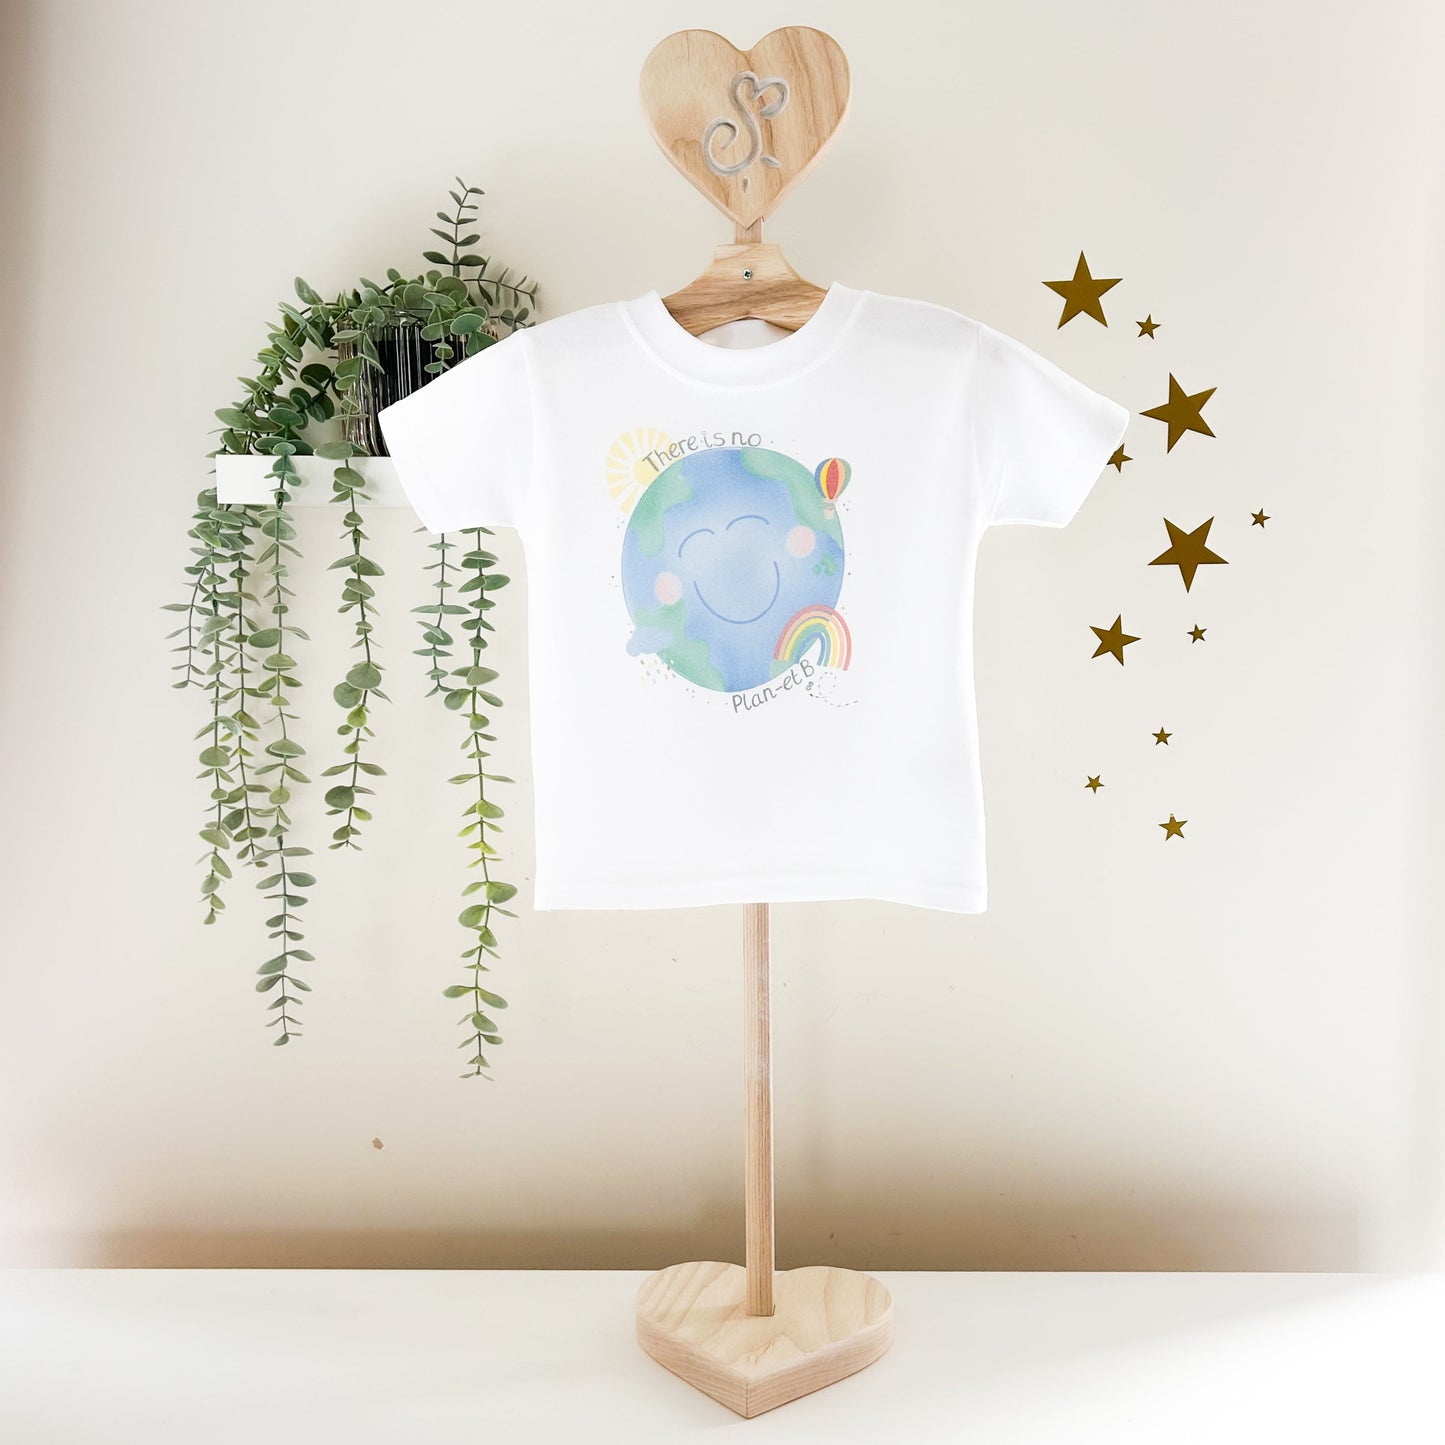 there is no planet-b t-shirt design for sustainable childrenswear